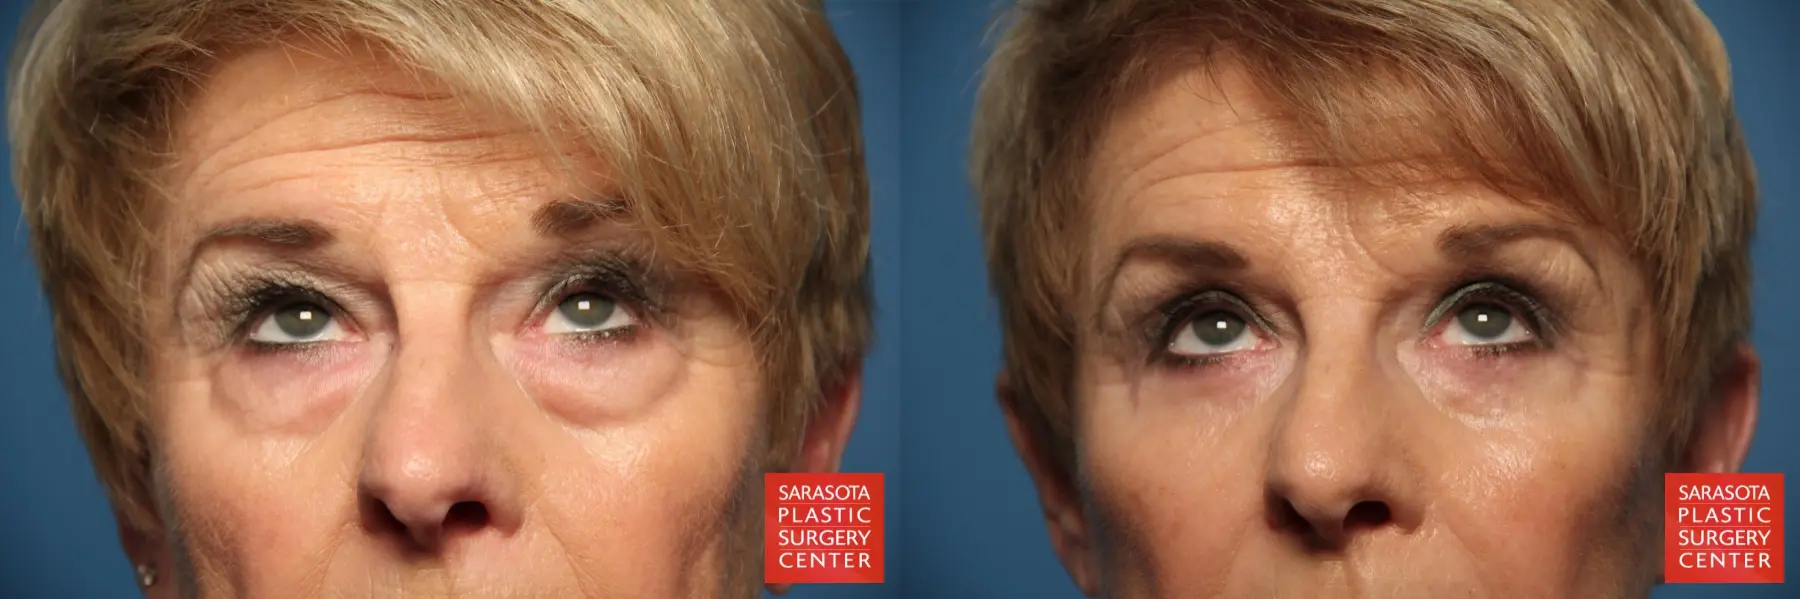 Eyelid Lift: Patient 11 - Before and After 2